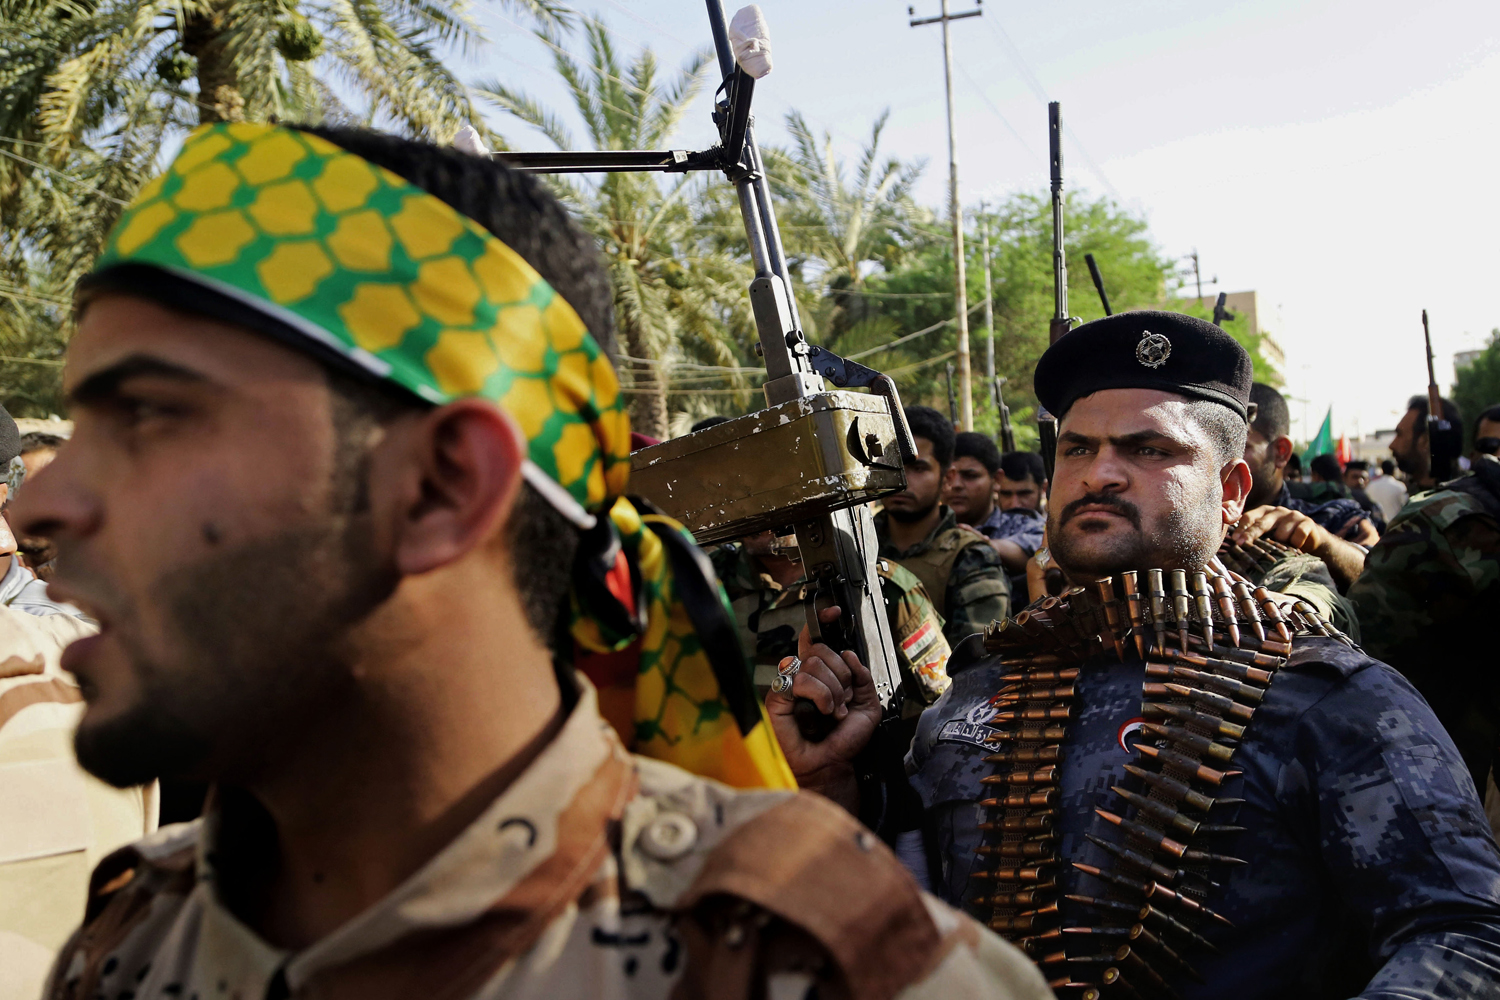 Shiite tribal fighters raise their weapons and chant slogans against the al-Qaida-inspired Islamic State of Iraq and Syria (ISIS) in Basra, June 16.